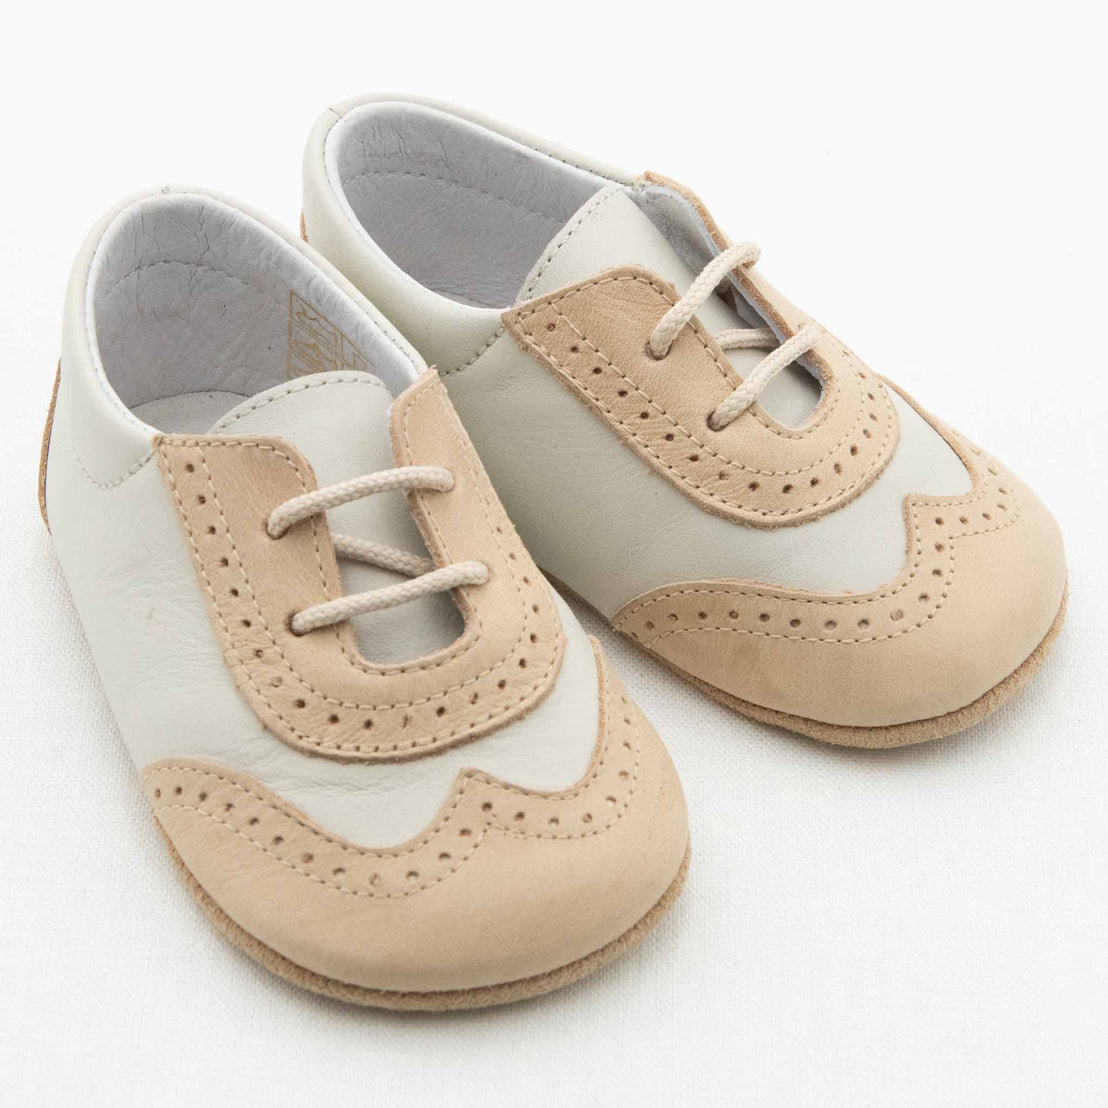 A pair of Beige & Ivory Wingtip Shoes made from beige and ivory leather rests on a white surface. The handmade leather shoes feature lace-up fronts and decorative perforations in the beige sections, adding a stylish, vintage touch. The soles are soft and designed for infants.